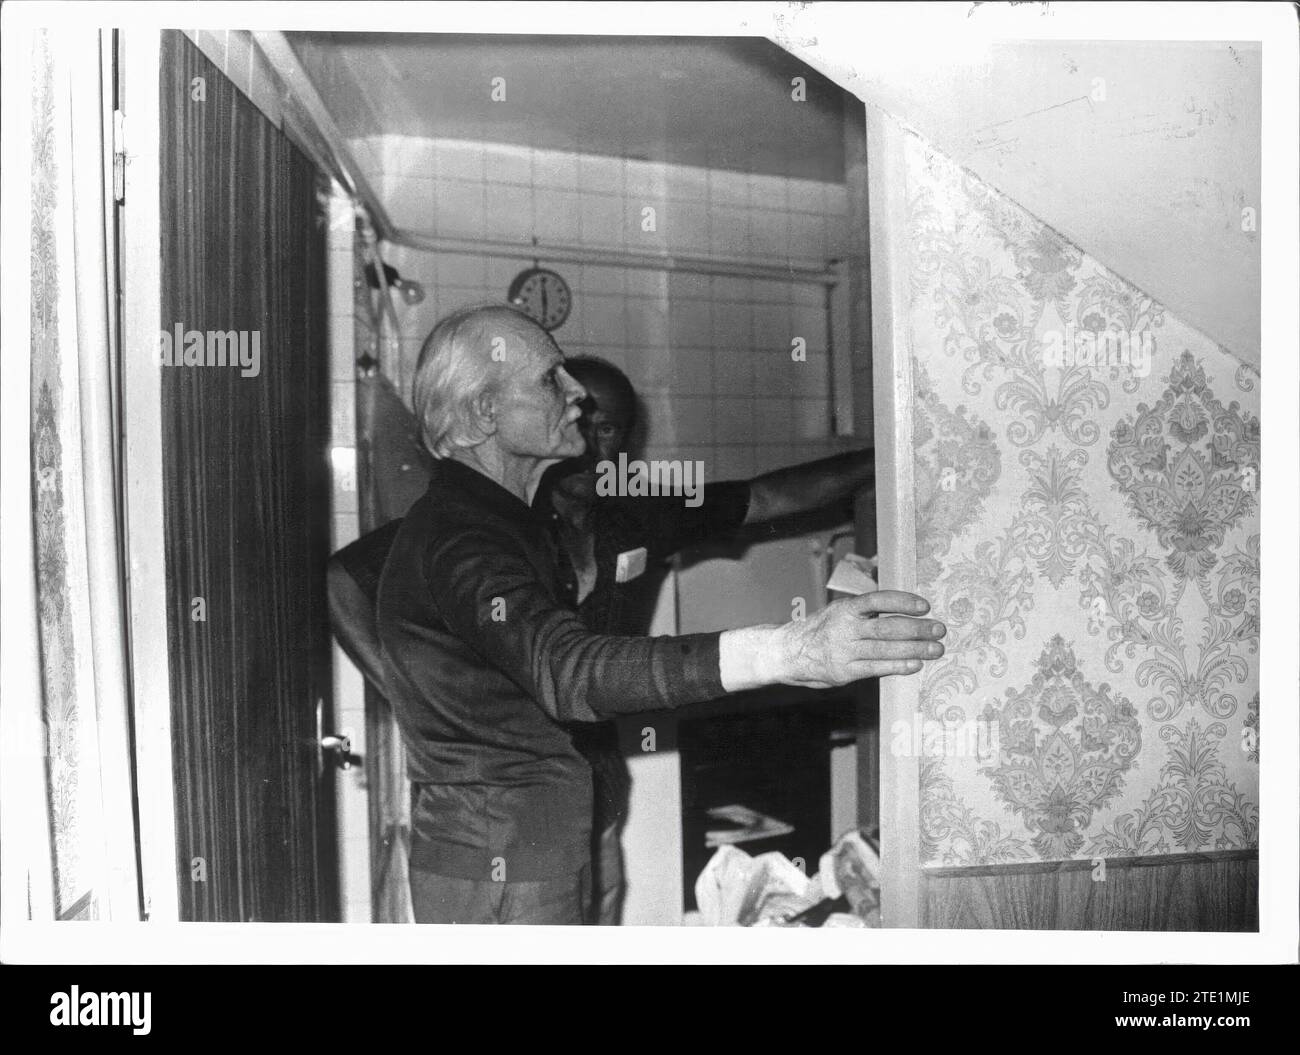 07/17/1977. Don Protasio shows the width of the entrance to the small room of his house that served as his refuge during the first years of his disappearance. Credit: Album / Archivo ABC / Manuel Sanz Bermejo Stock Photo